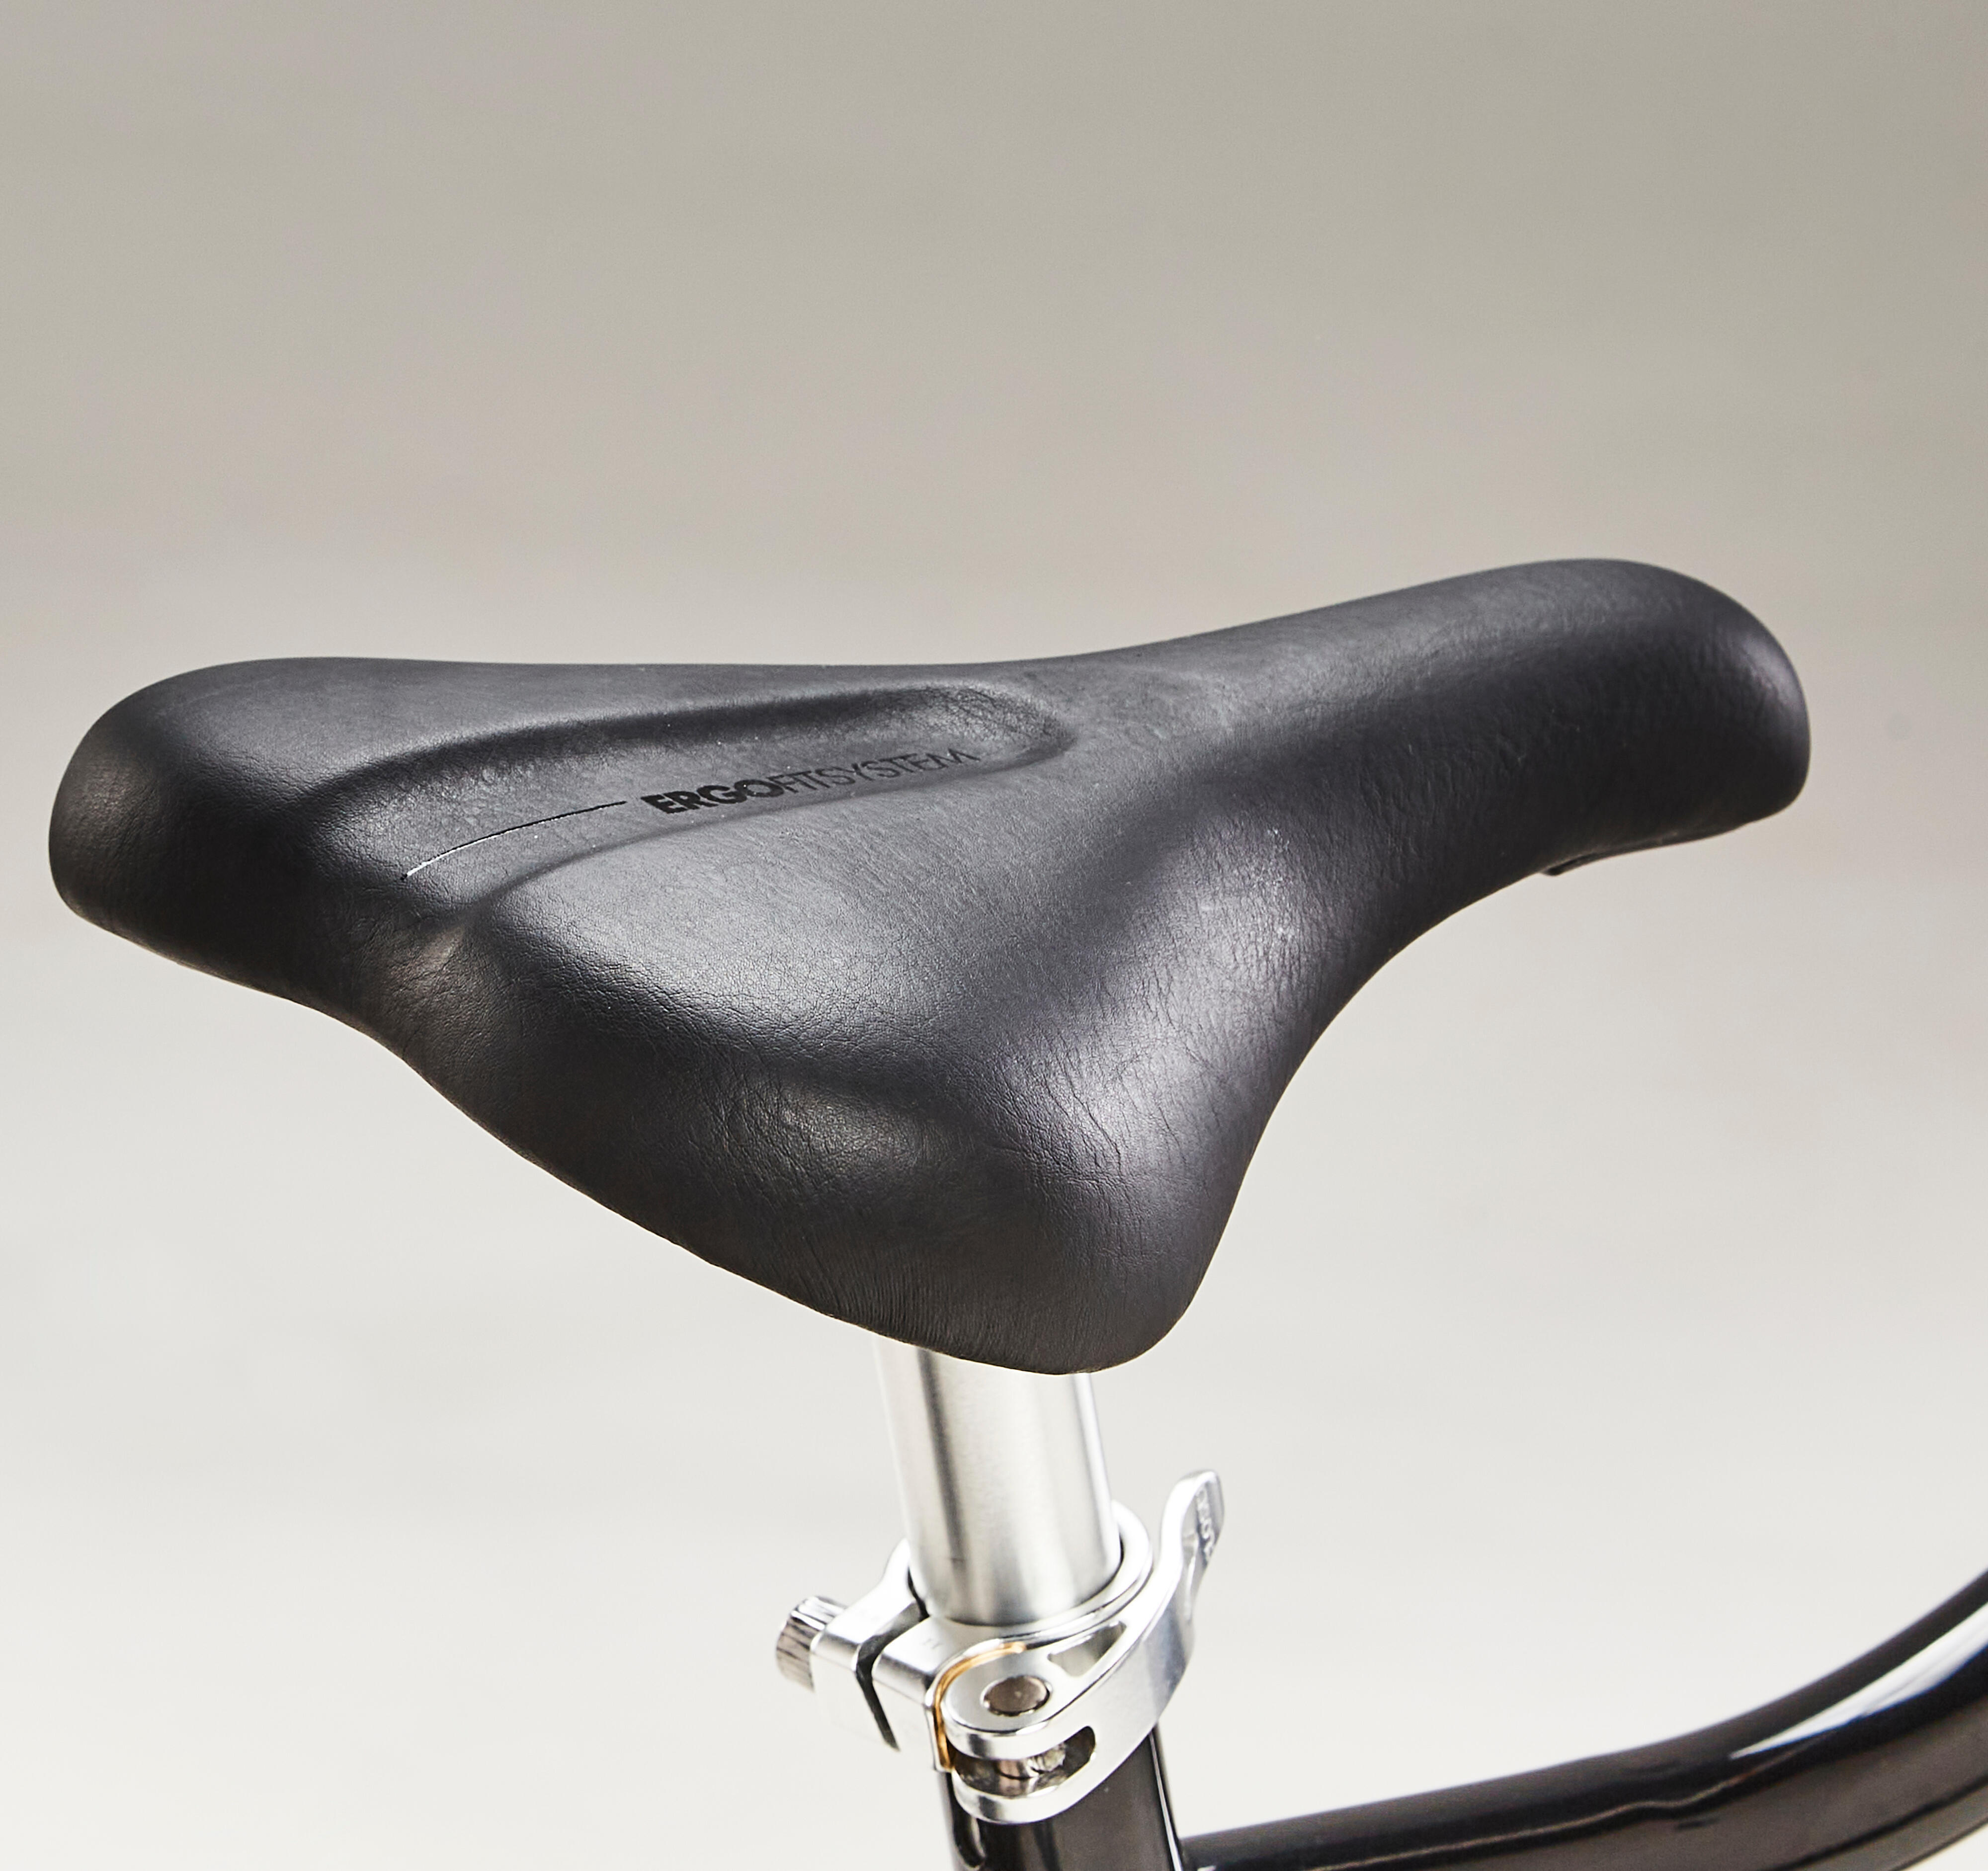 ADJUSTING THE HEIGHT OF THE SADDLE BEFORE YOUR FIRST RIDE